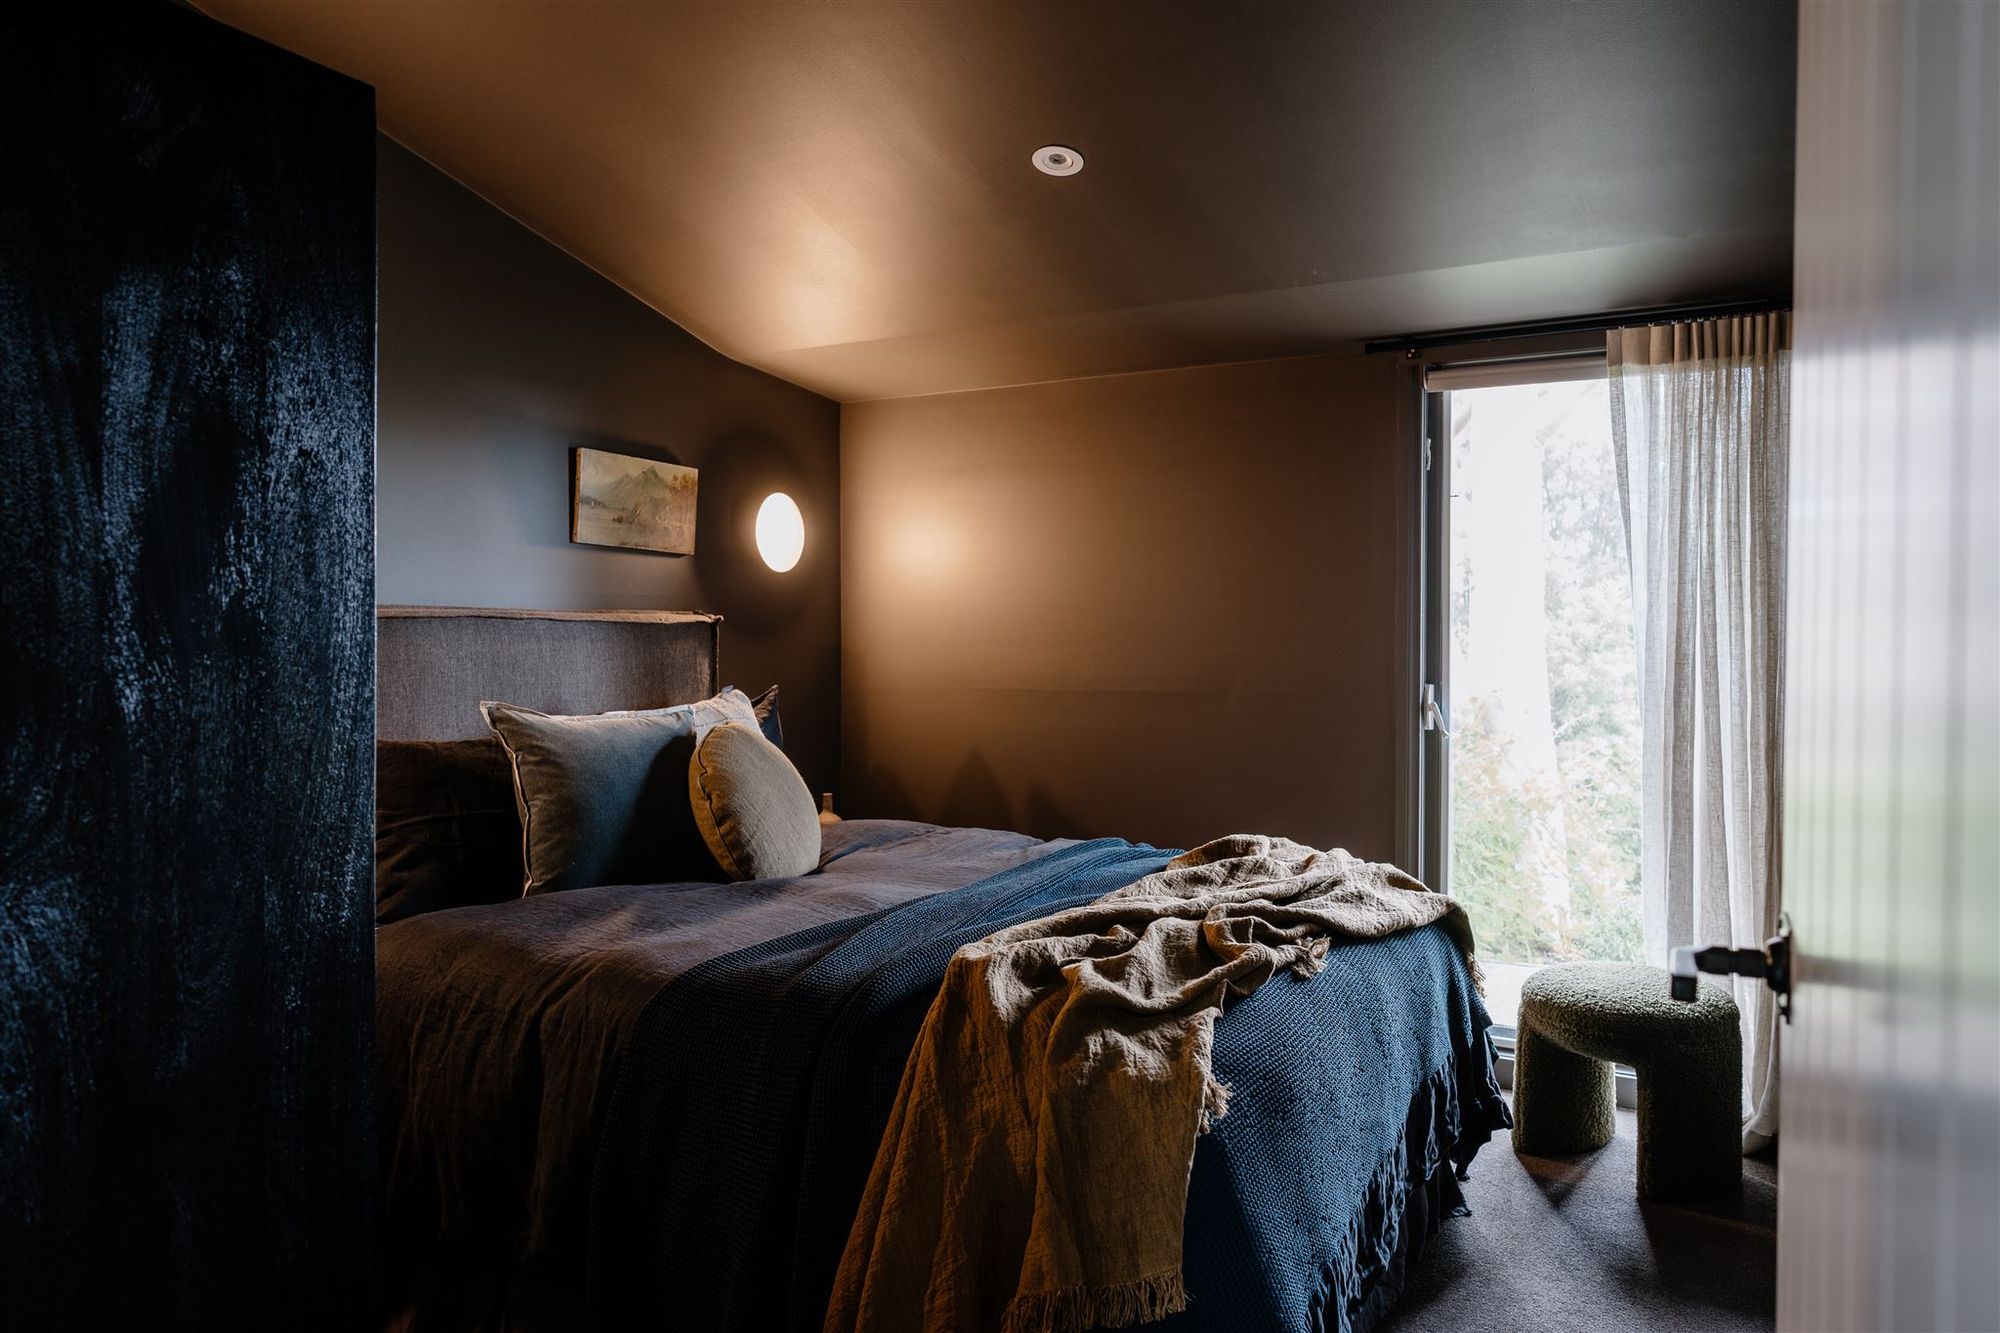 Jumoku Daylesford. Showing the moody and relaxing bedroom